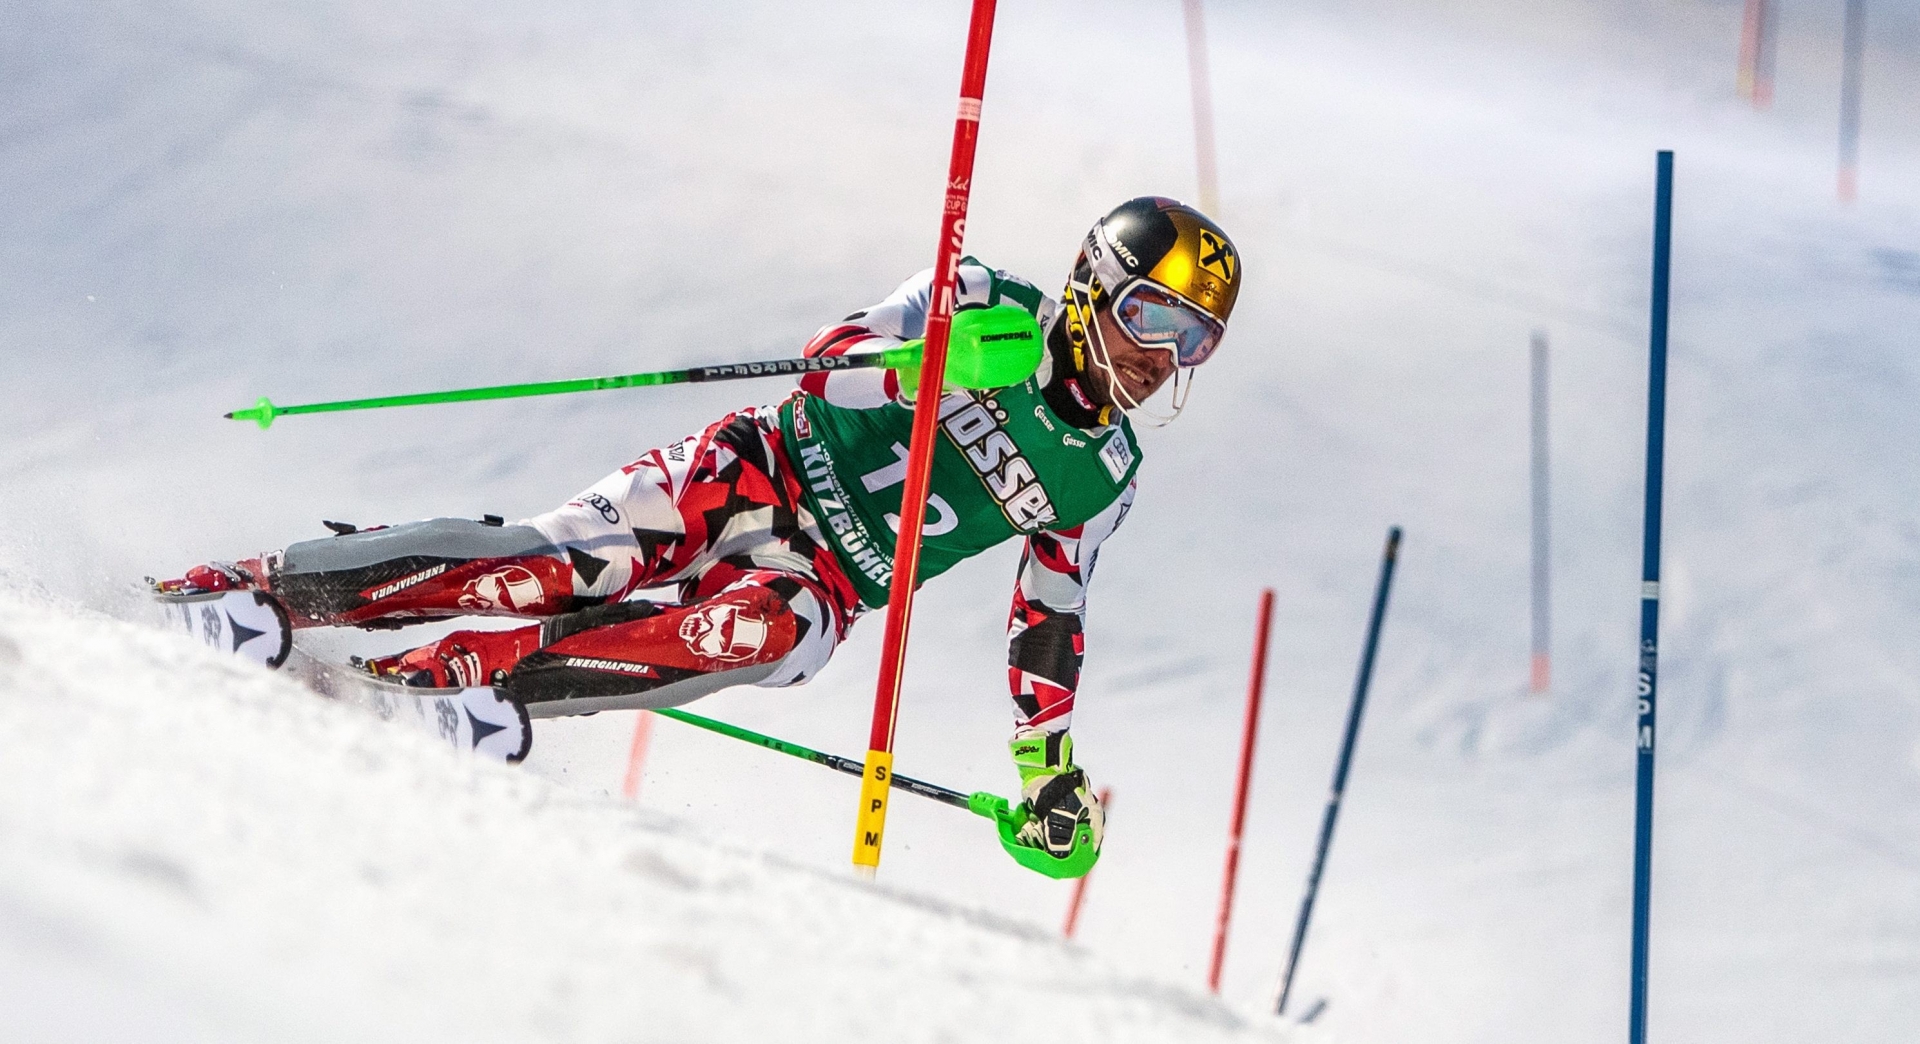 epa05118981 Marcel Hirscher of Austria competes in the Slalom race of the Men's Alpine Skiing Super Combined World Cup in Kitzbuehel, Austria, 22 January 2016.  EPA/EXPA/JFK AUSTRIA ALPINE SKIING WORLD CUP